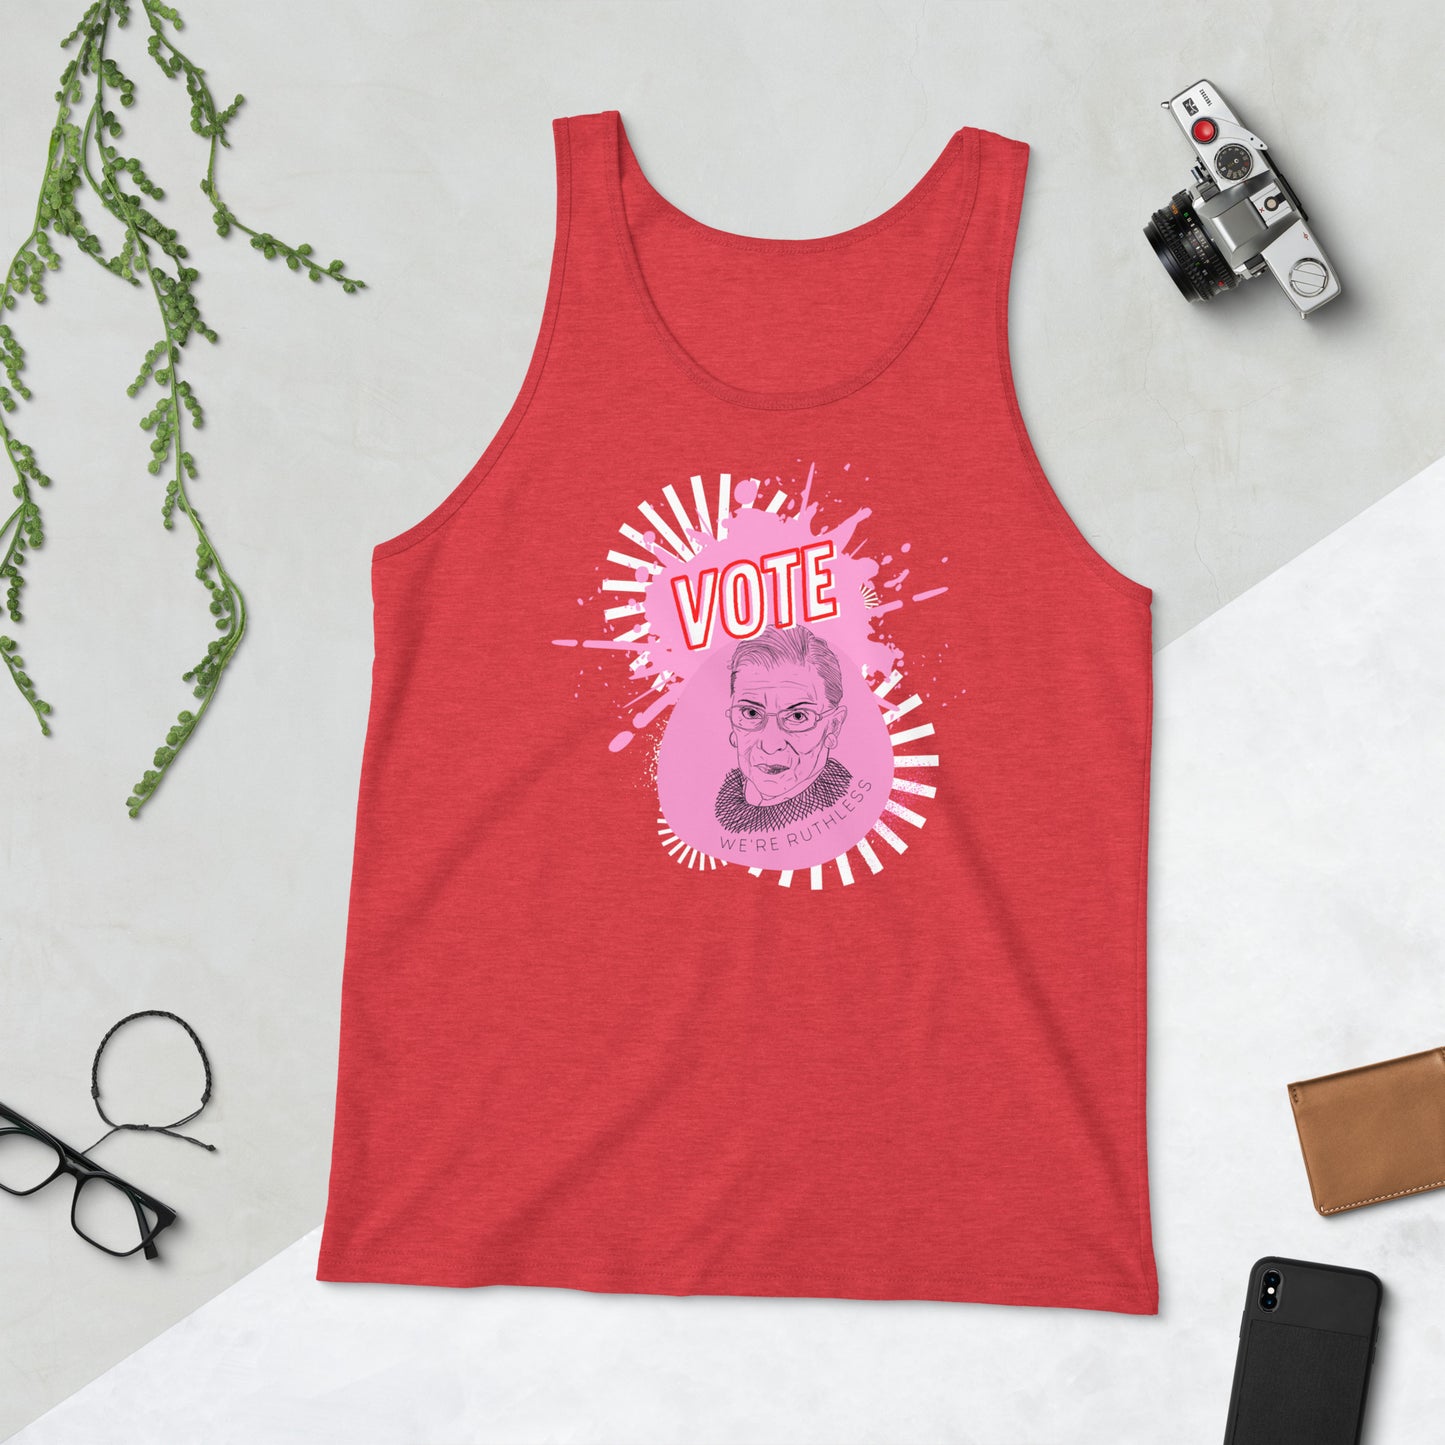 Vote - We're Ruthless Tank Top